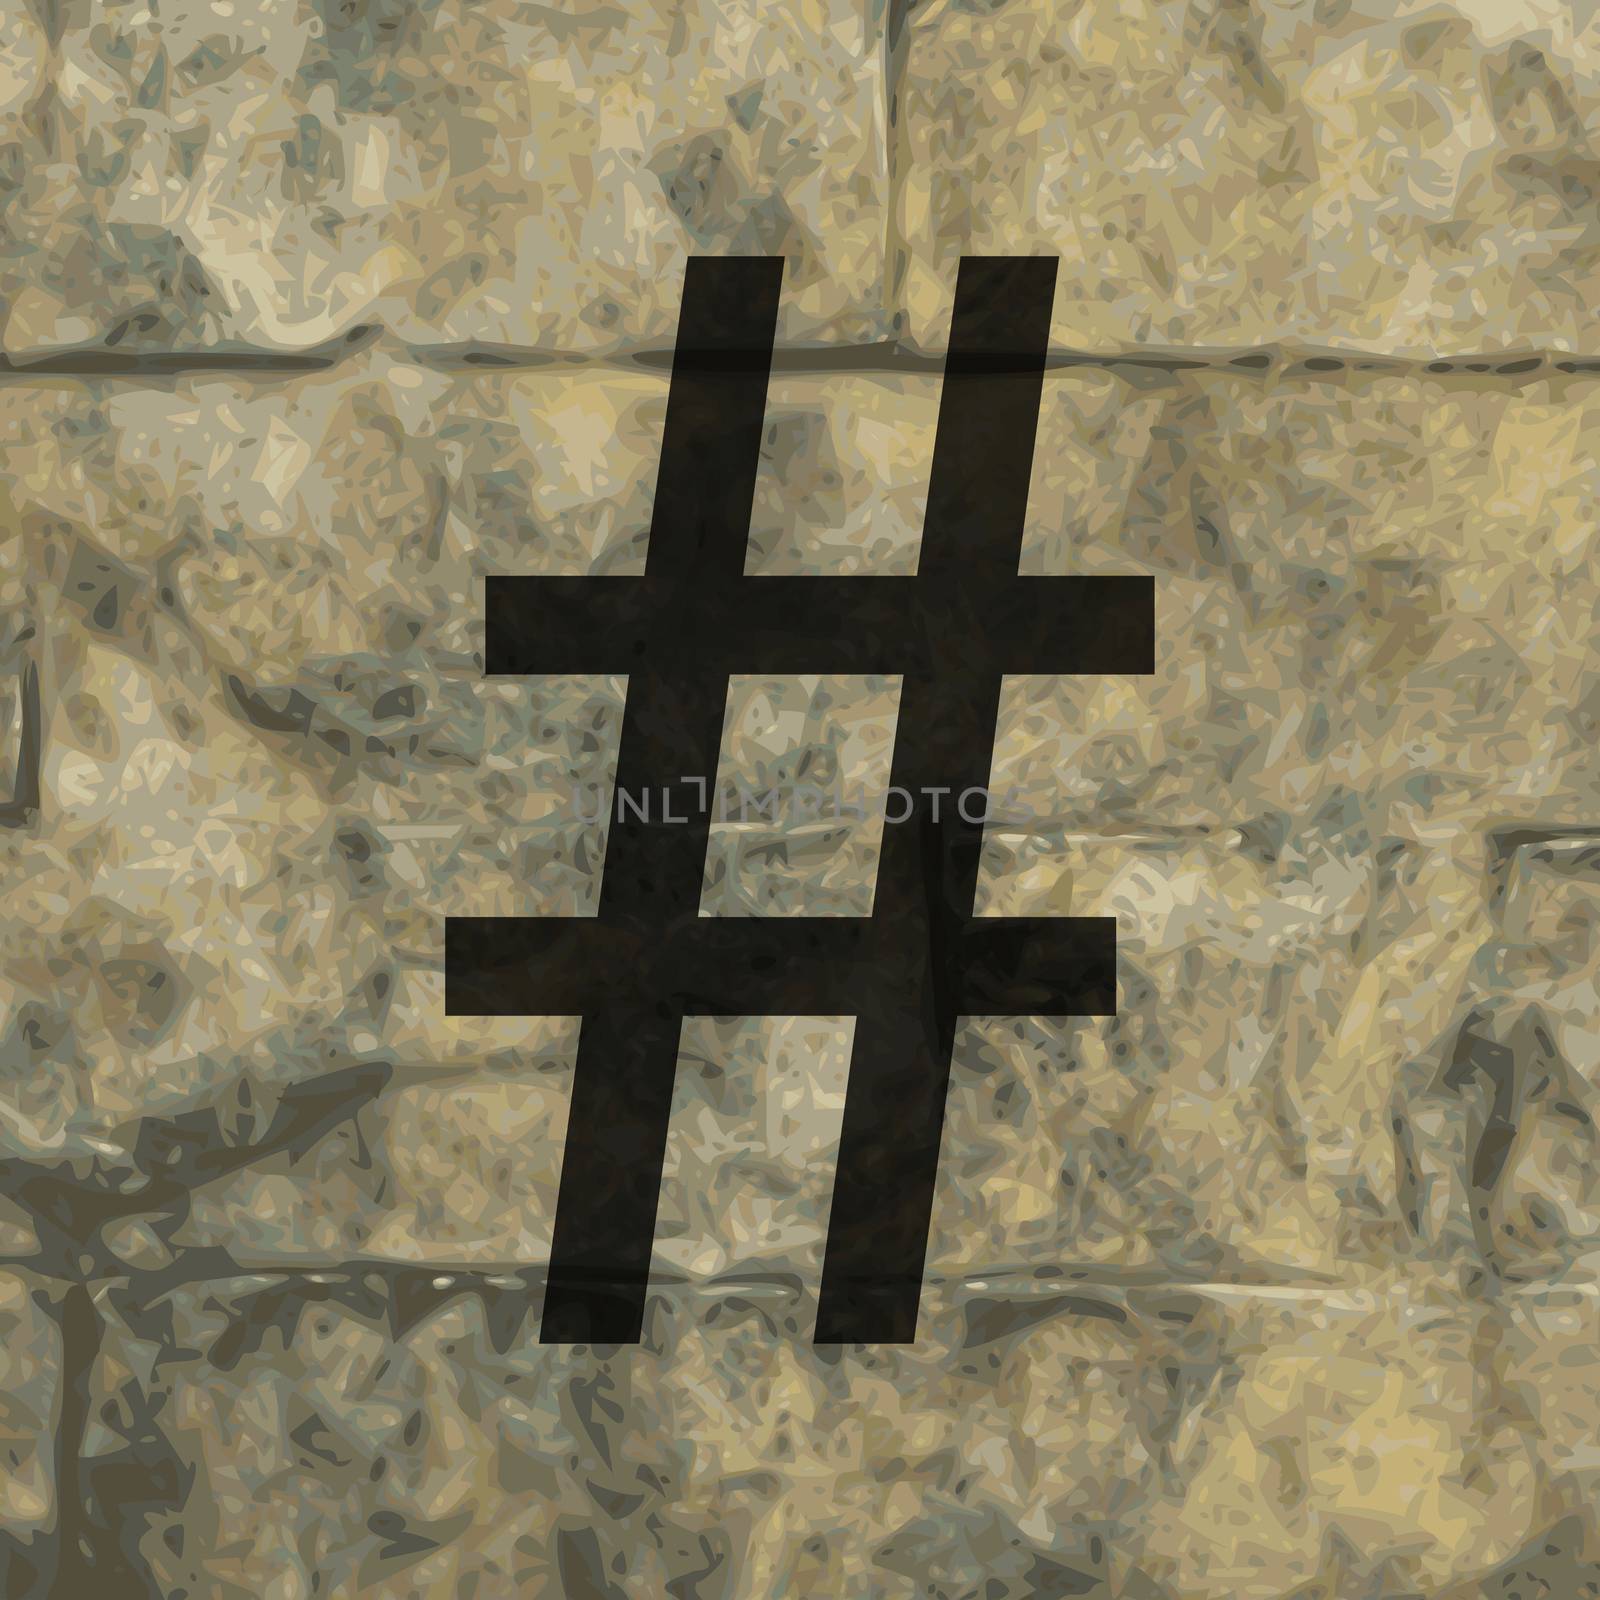 Hashtag Speech icon Flat with abstract background by serhii_lohvyniuk